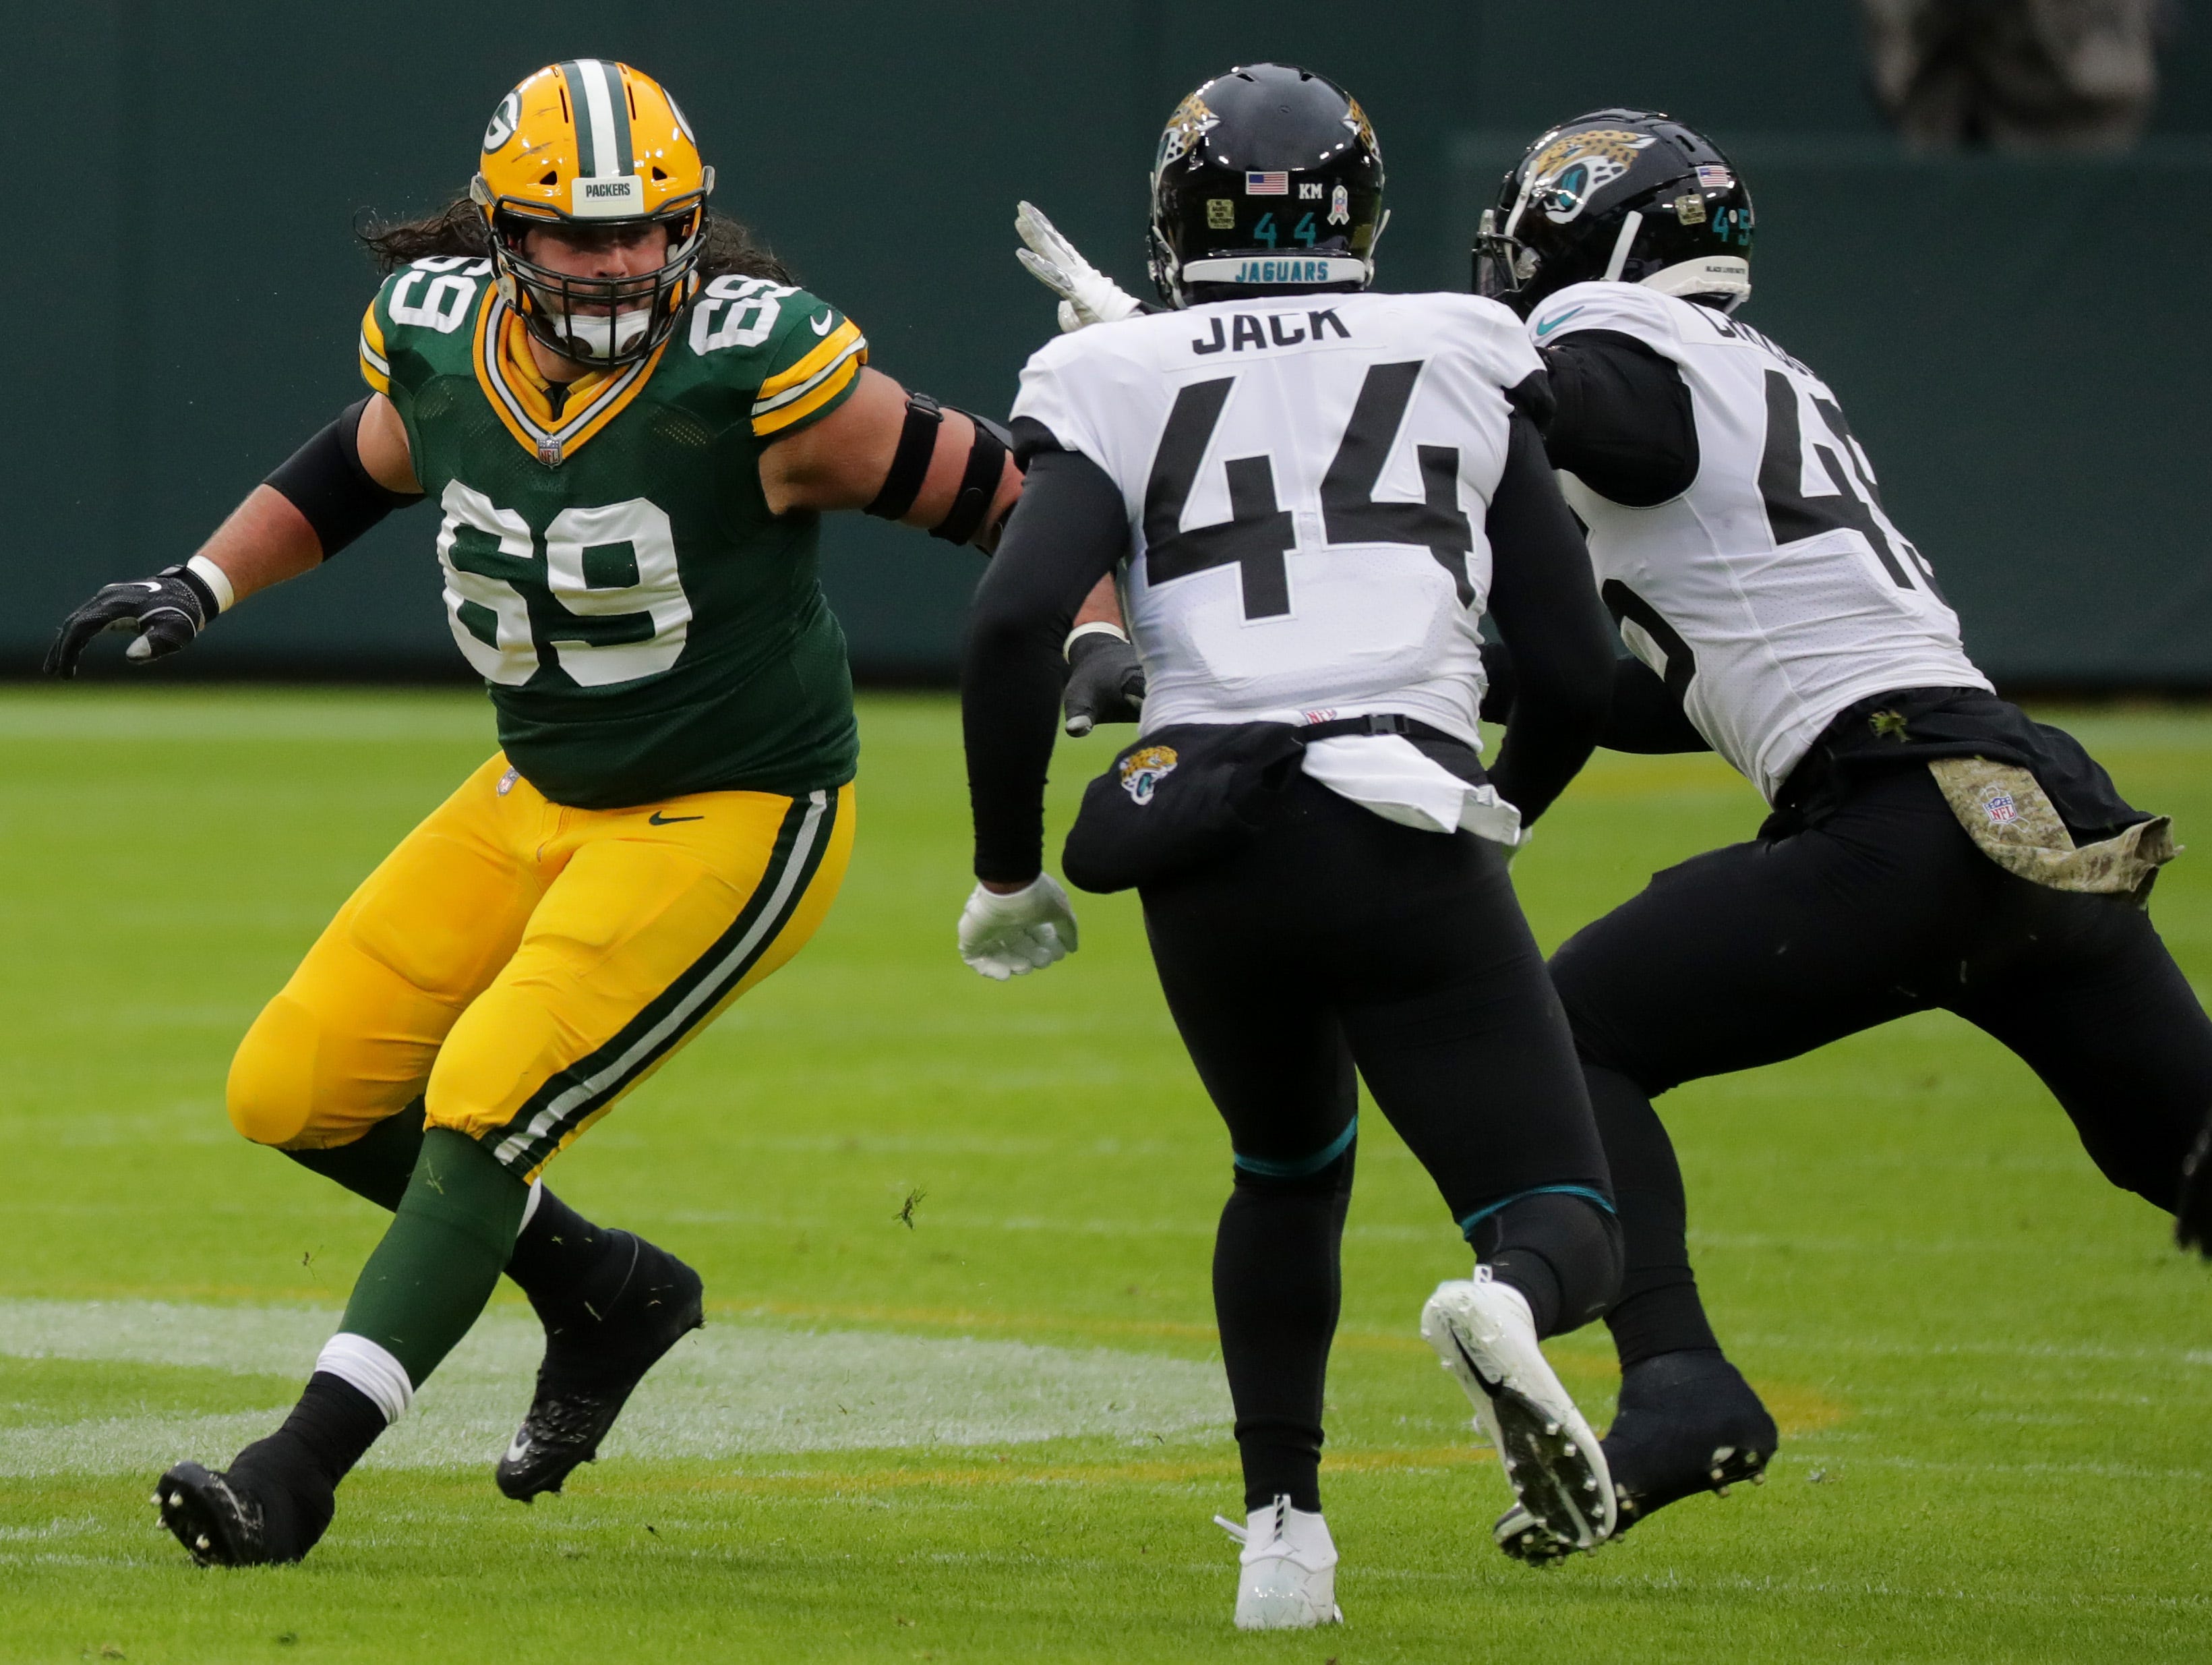 Green Bay Packers offensive tackle David Bakhtiari (69) provides pass protection during the first quarter of their game against the Jacksonville Jaguars at Lambeau Field in Green Bay, Wis.